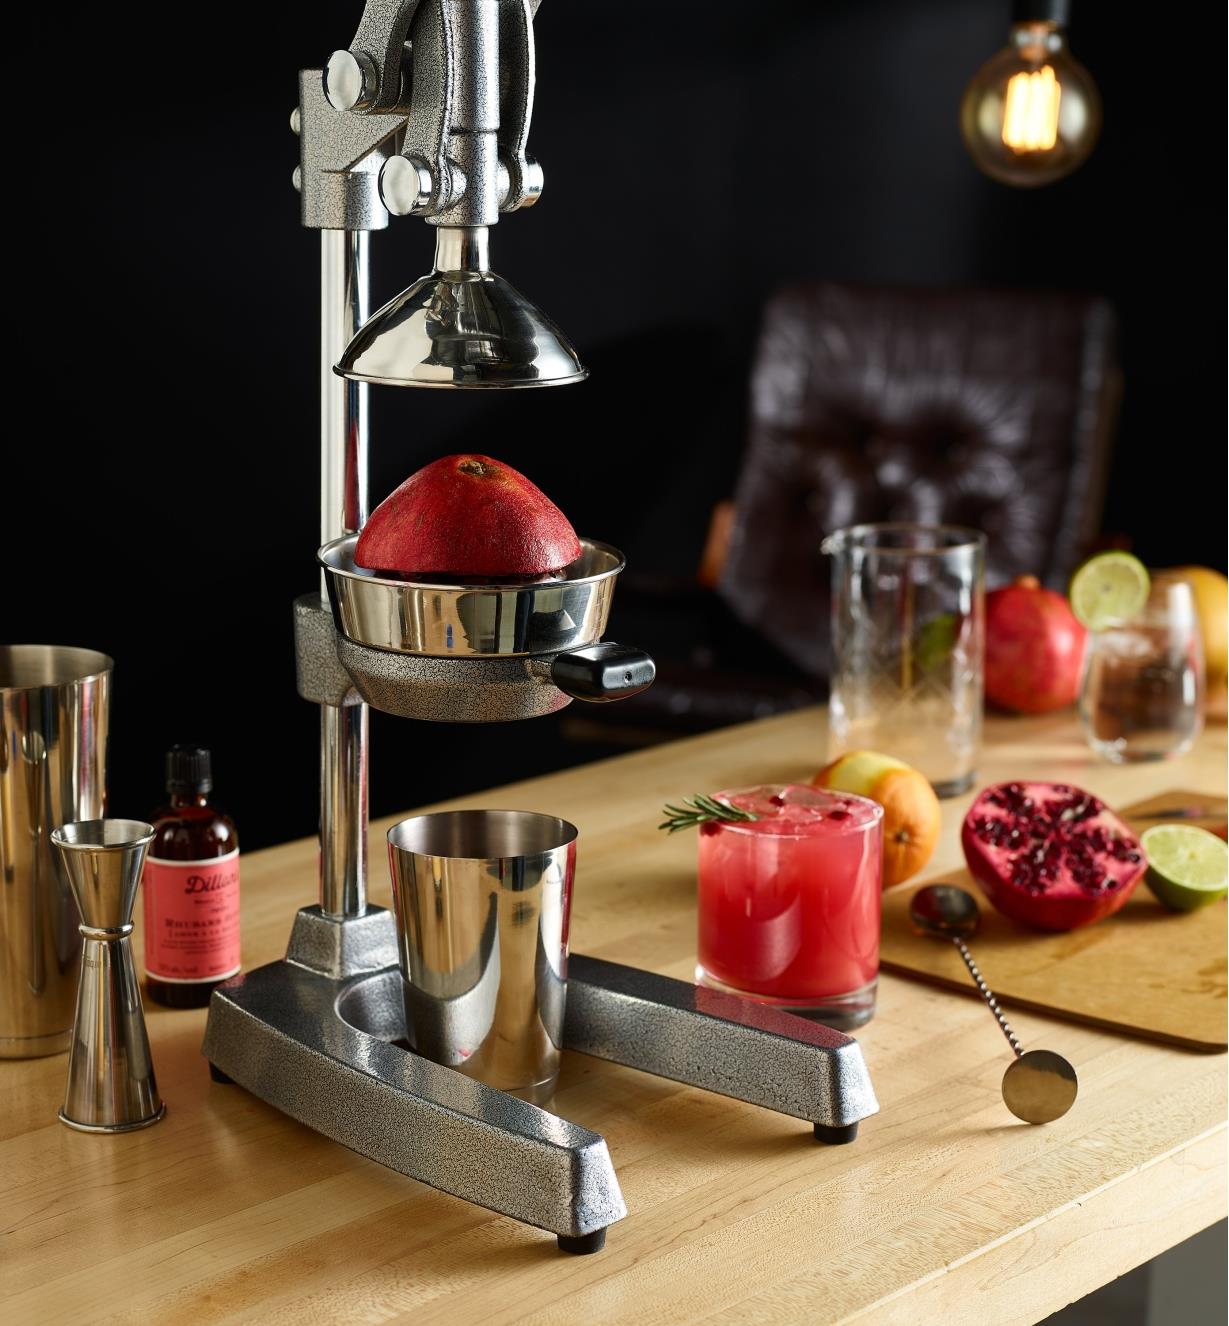 A juice press in a home bar setting, used to squeeze a fresh pomegranate